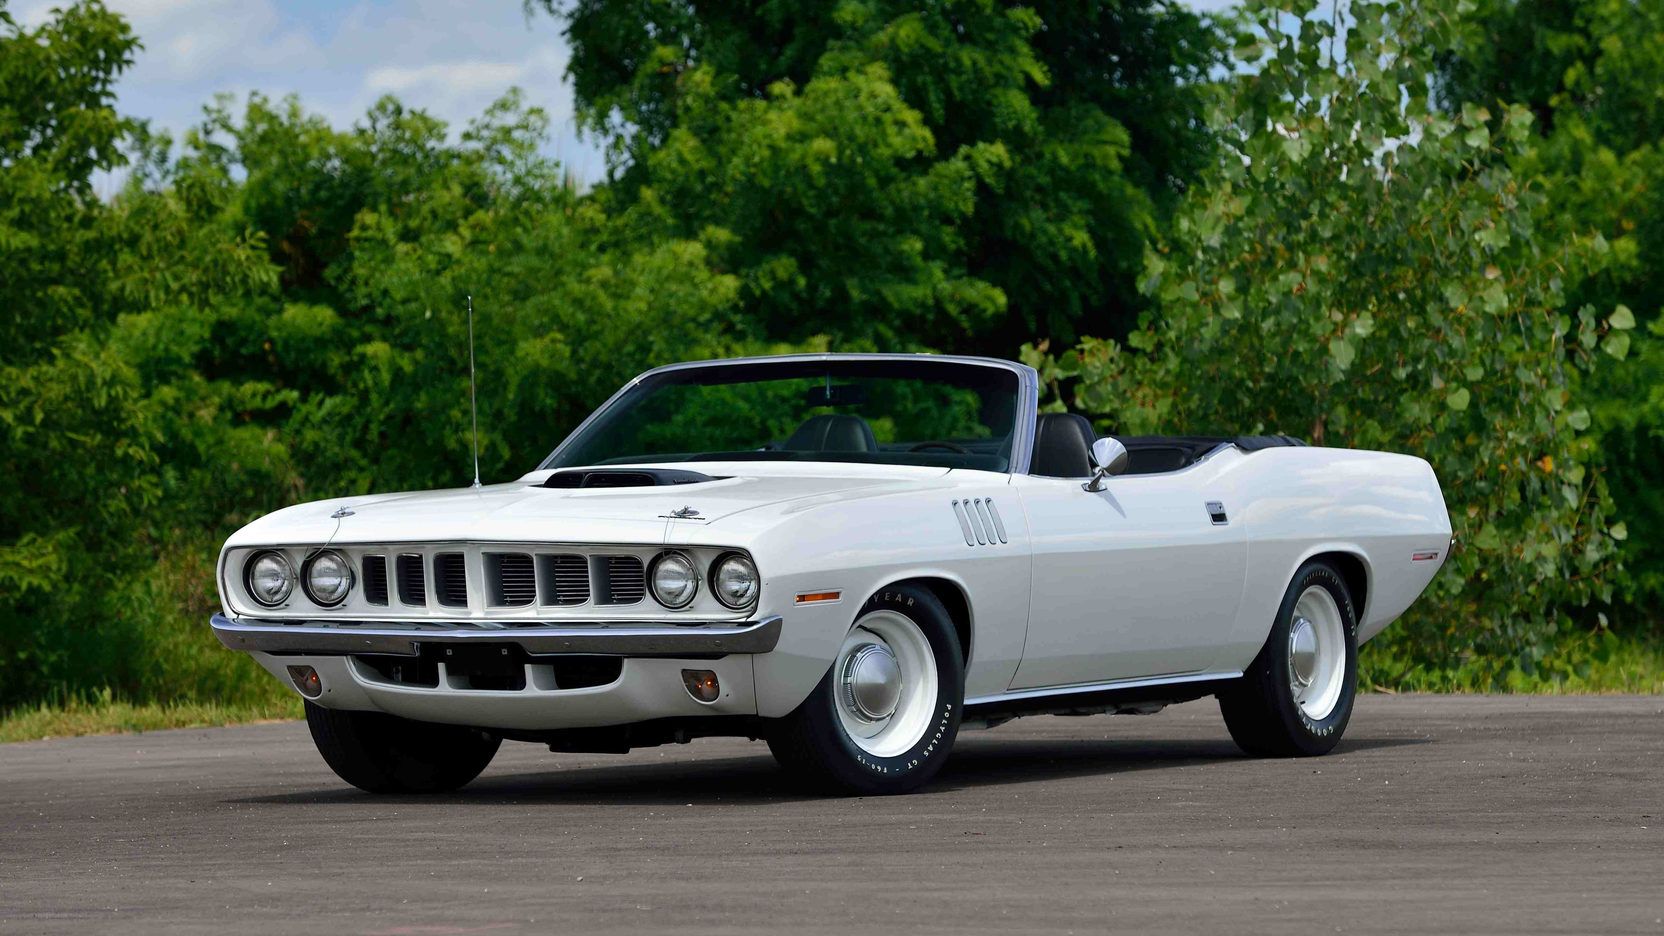 White 1971 Plymouth Barracuda Parked